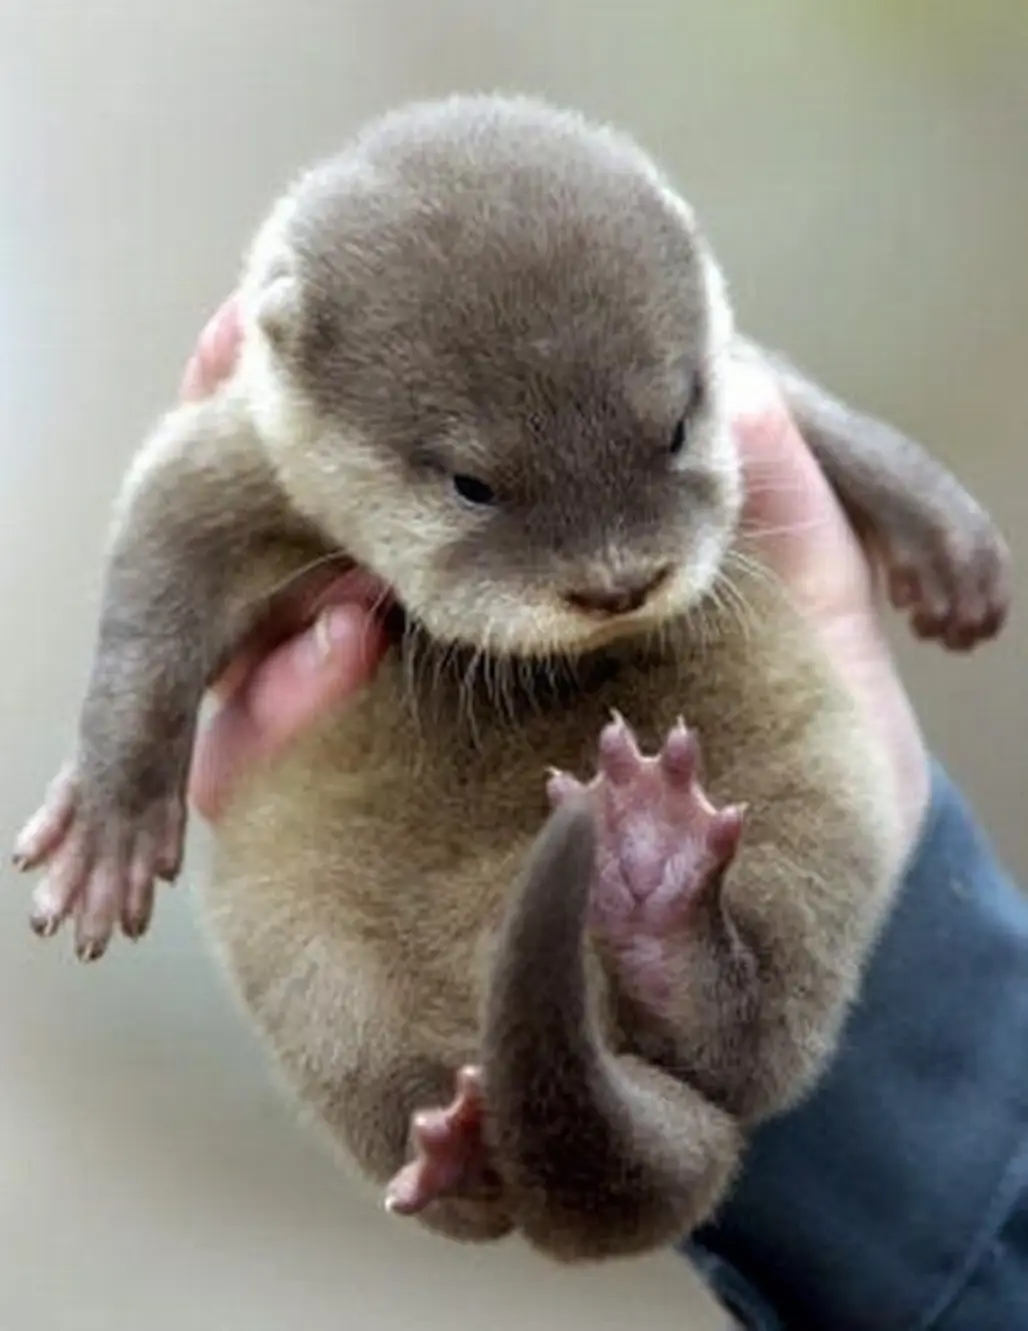 "is It Me or is It Gettin' 'otter in Here?"